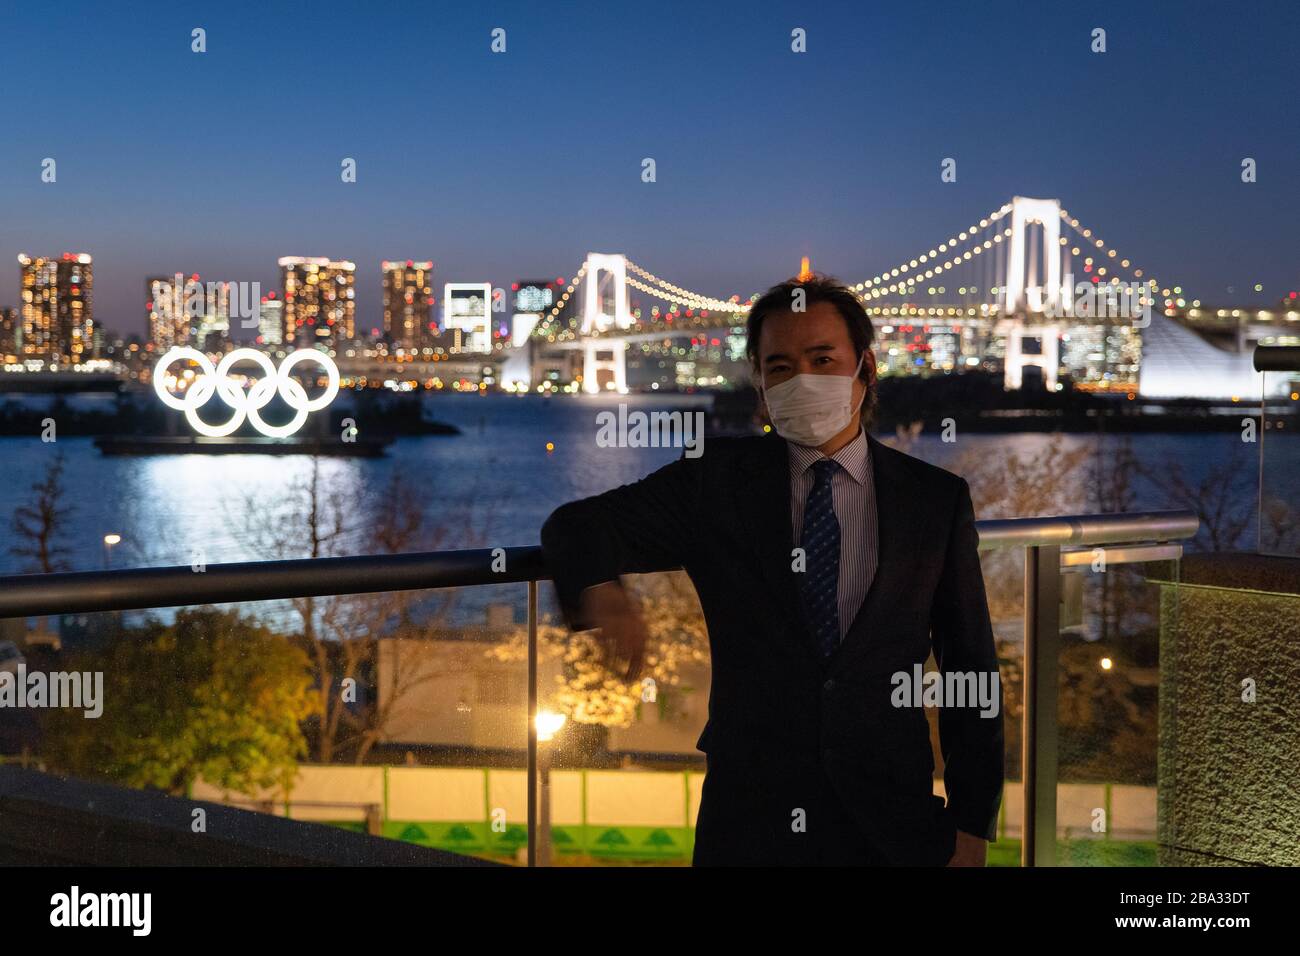 Odaiba, Minato Ward, Tokyo, Japan—MAR 25, 2020: Japanese Businessman Wears a Mask in front of the Olympic Symbol during the Corona Virus Pandemic Stock Photo